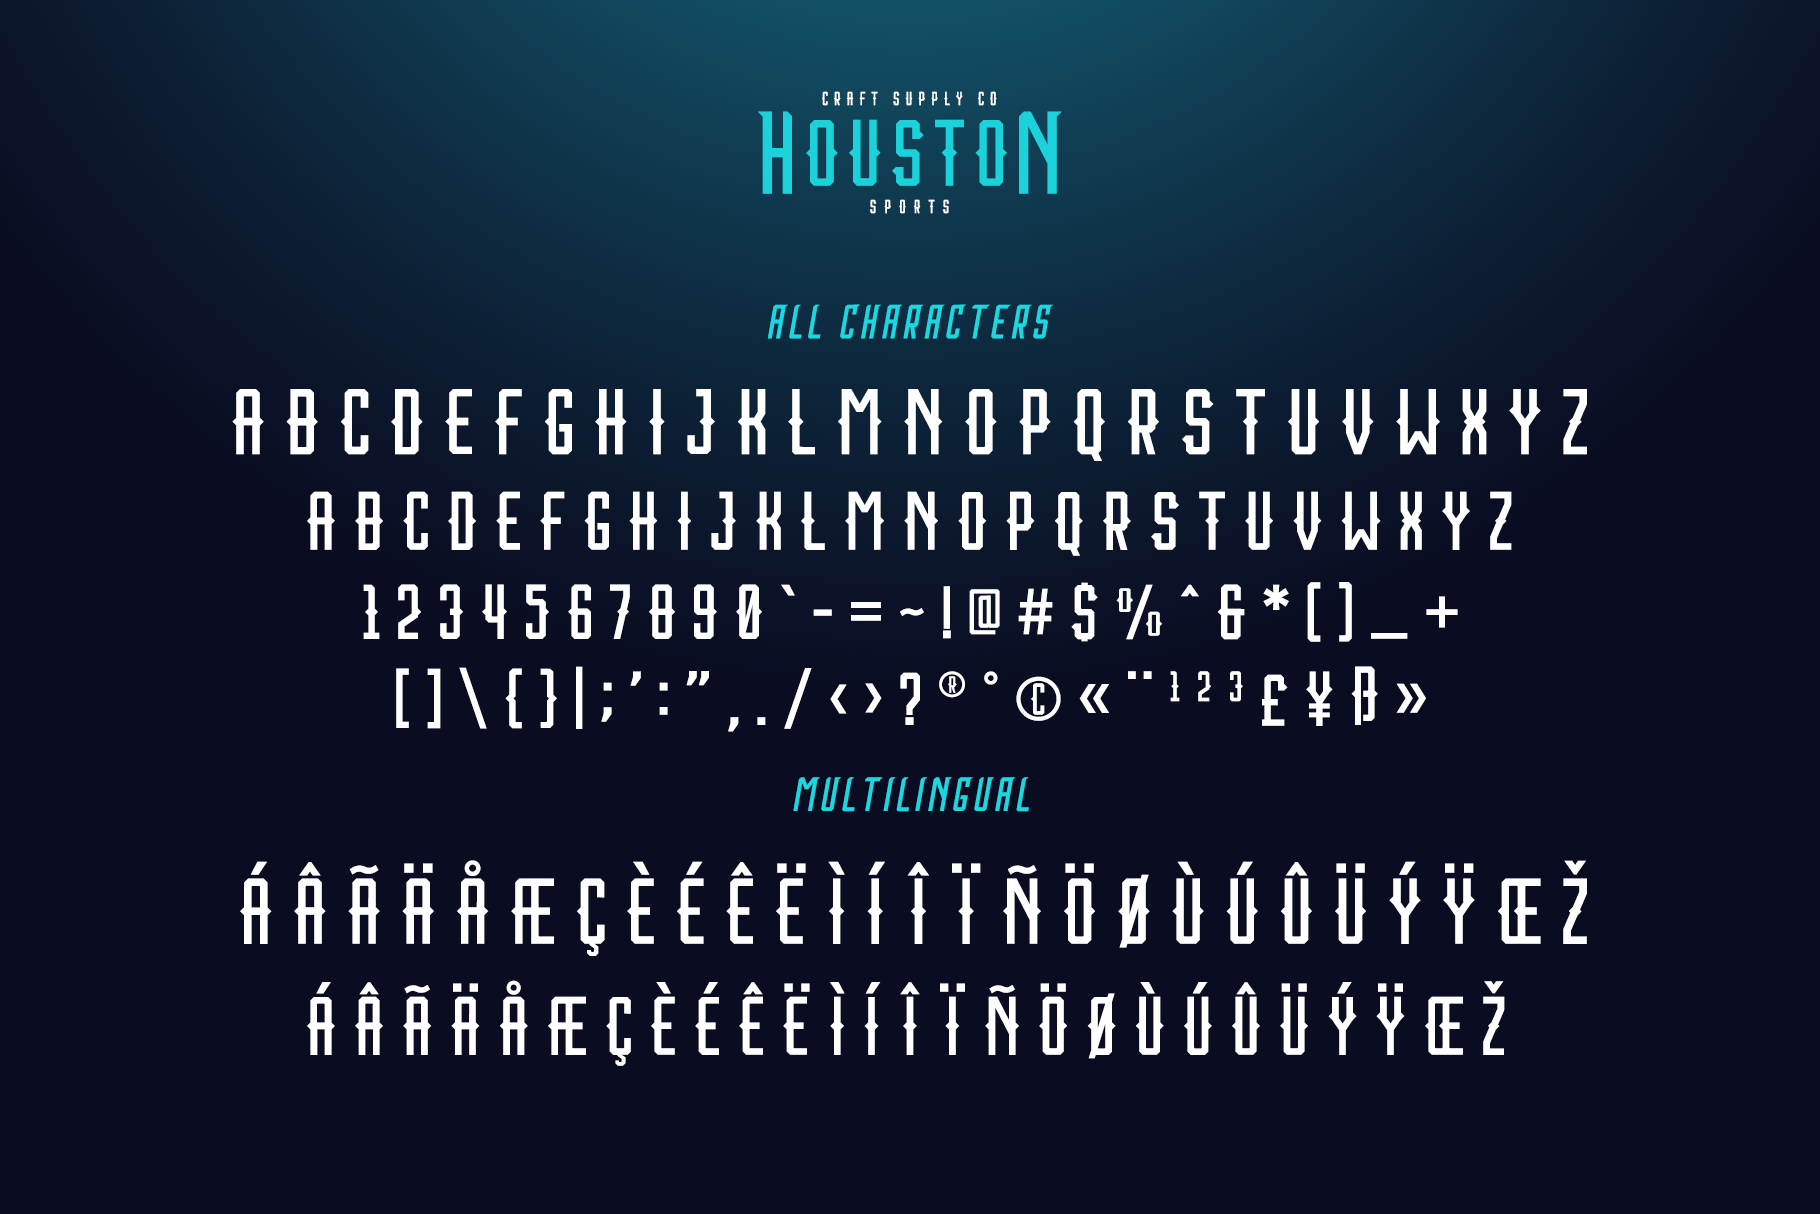 Houston Sports Font Family By Craftsupplyco Graphicriver